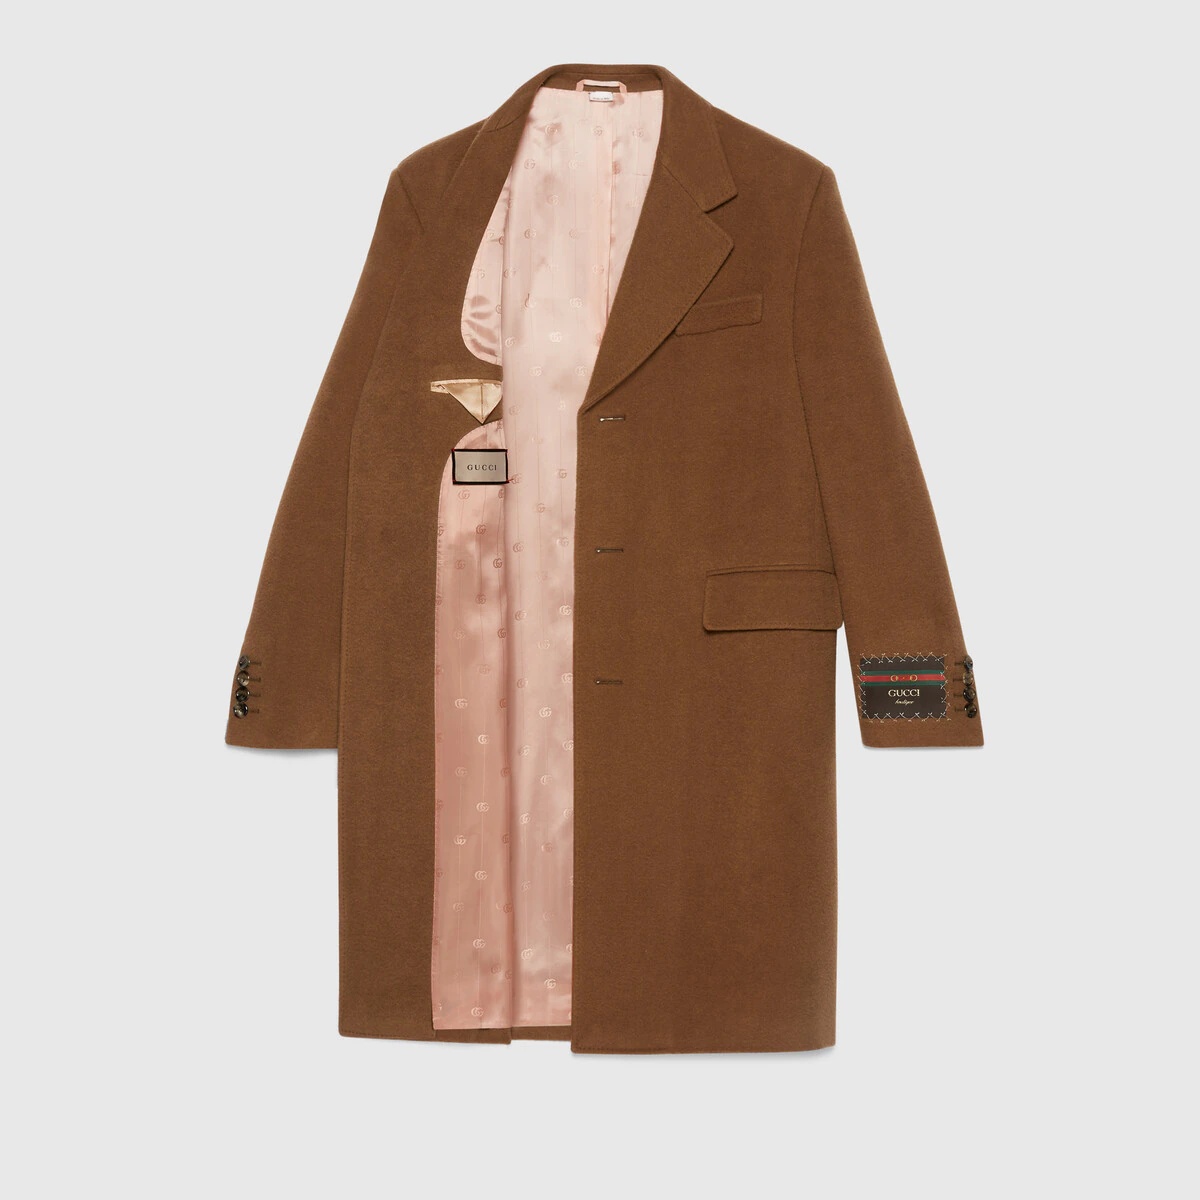 Wool coat with Gucci label - 3